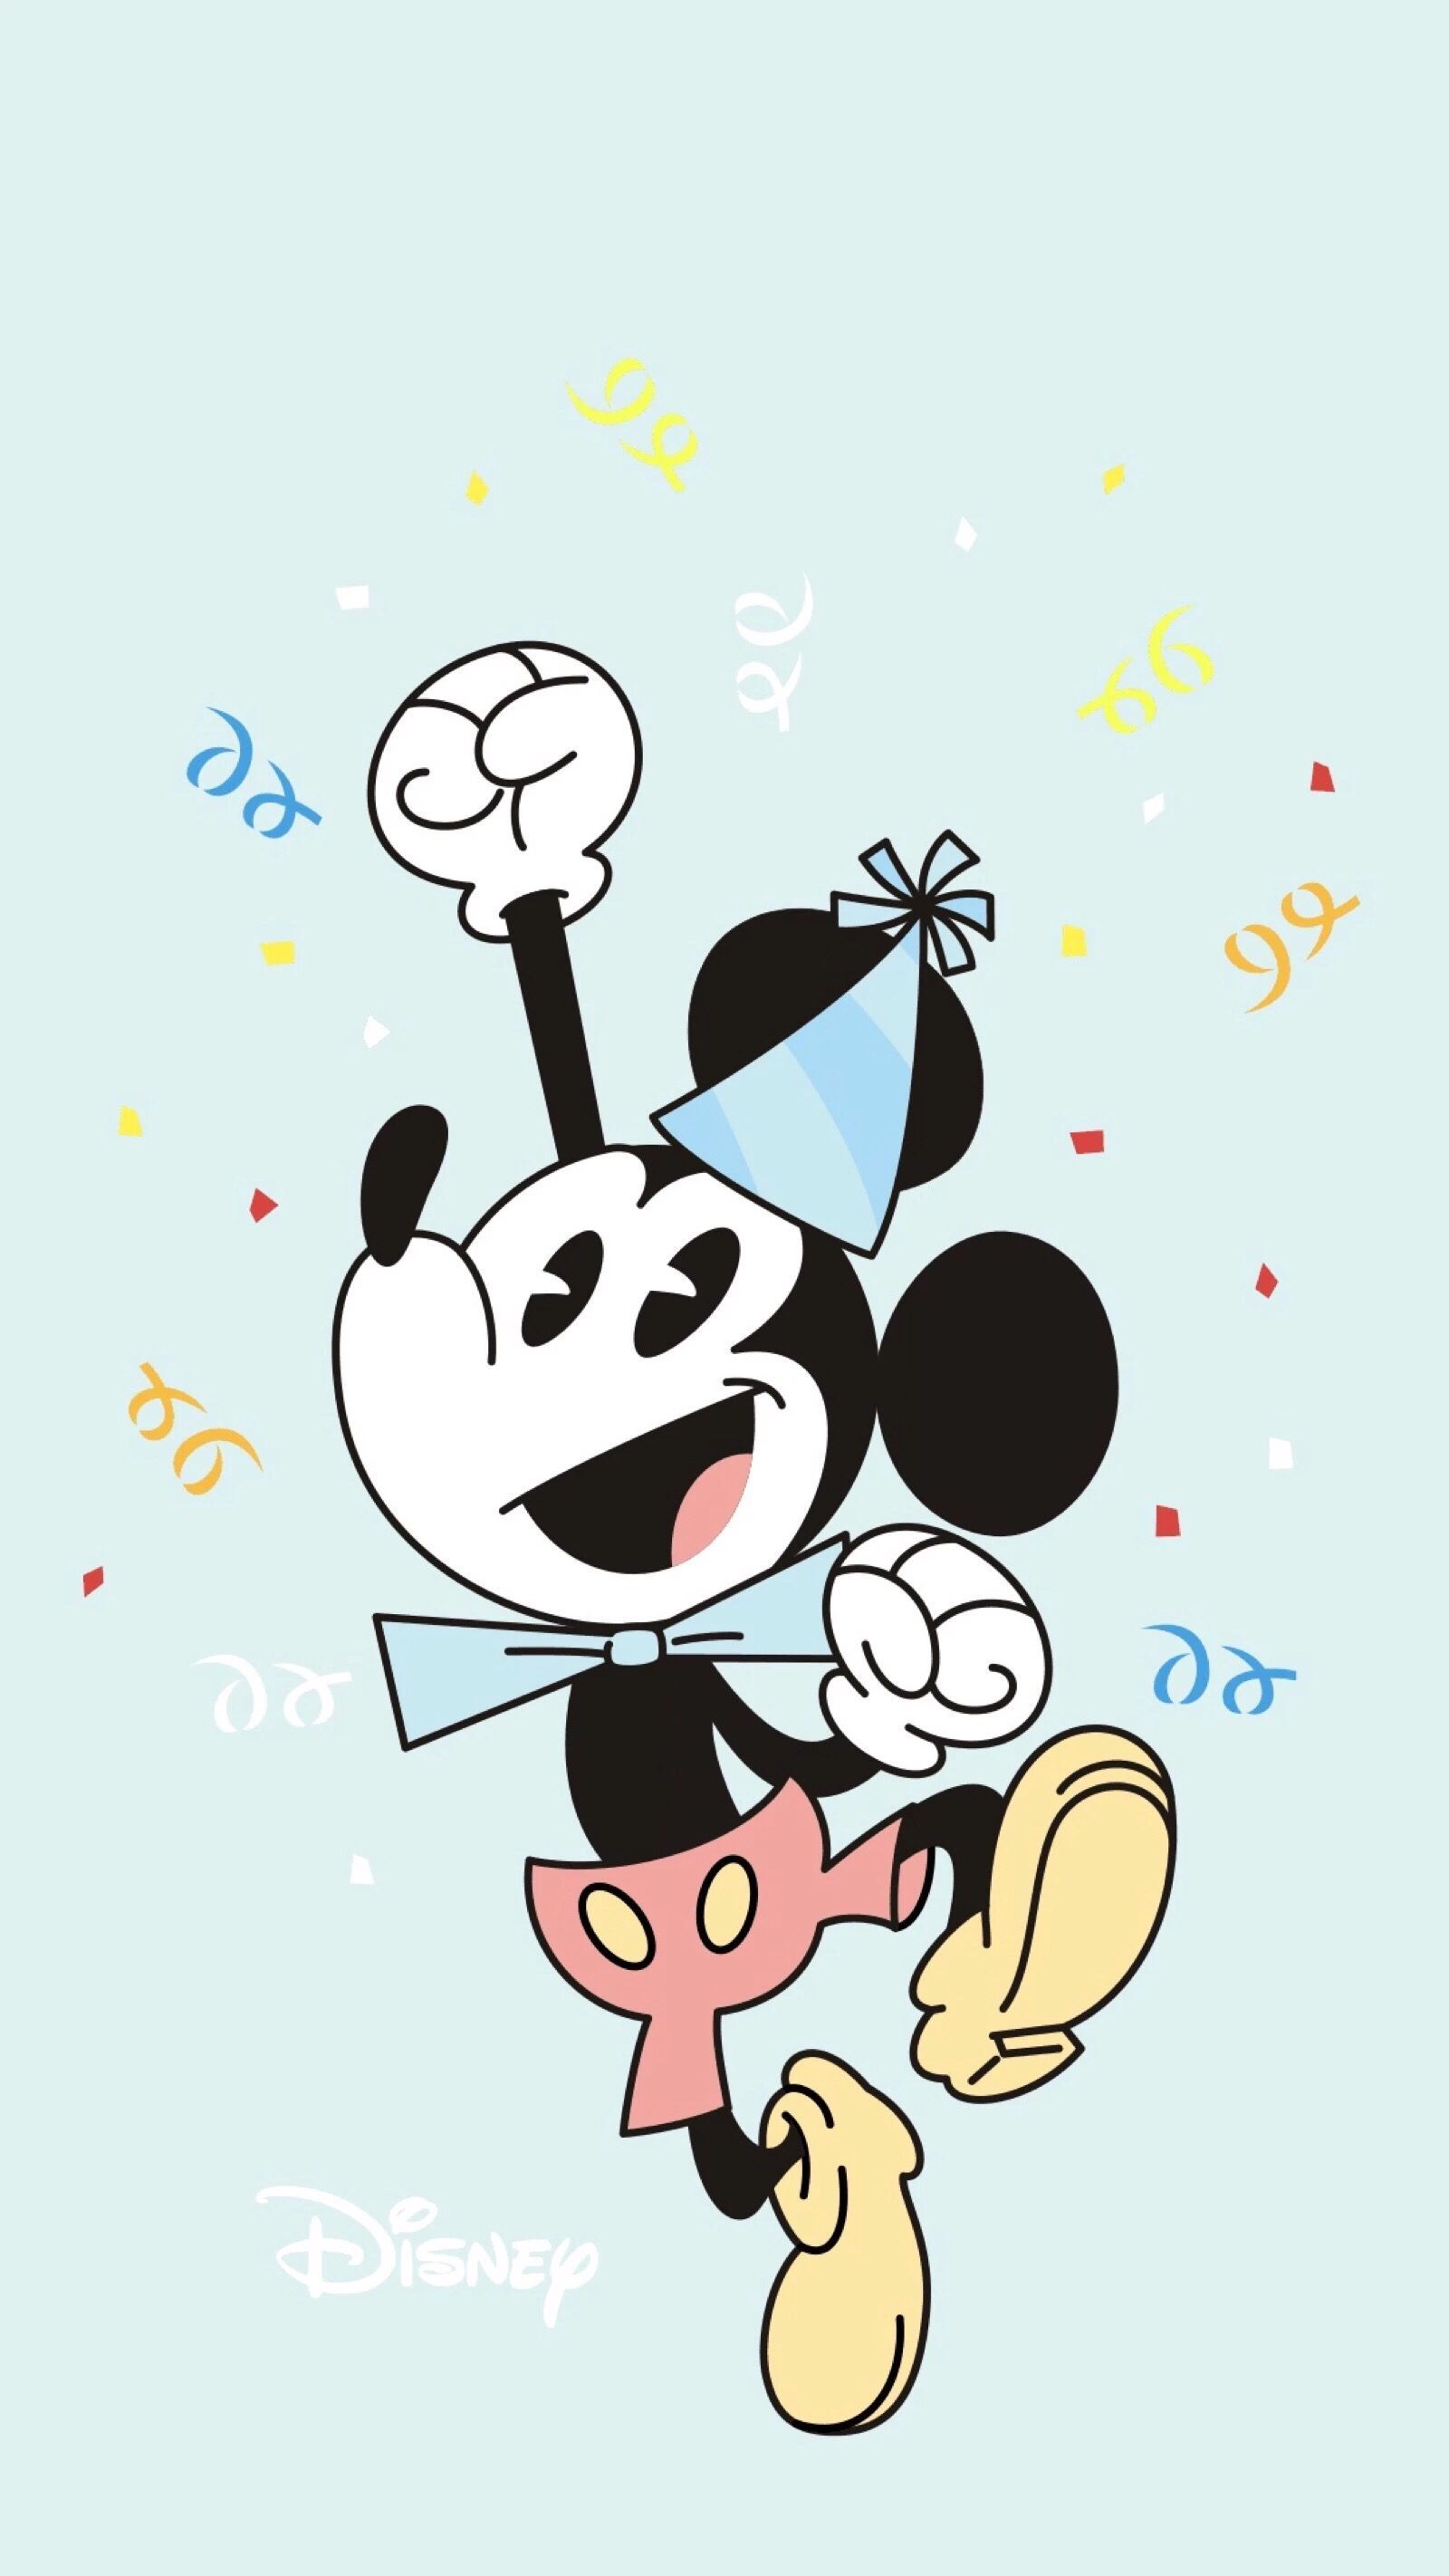 A cartoon character with party hat and confetti - Mickey Mouse